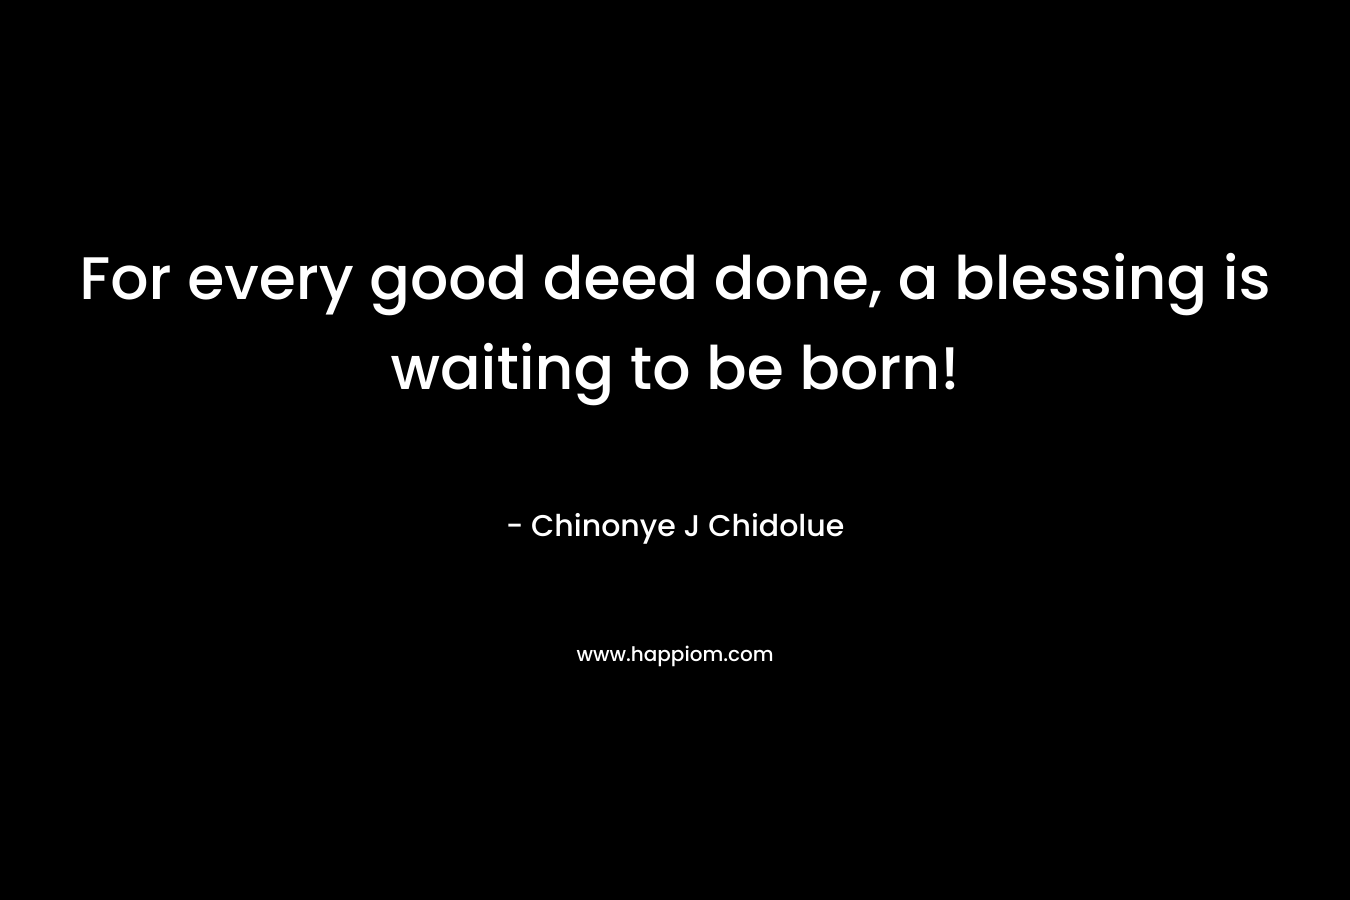 For every good deed done, a blessing is waiting to be born!